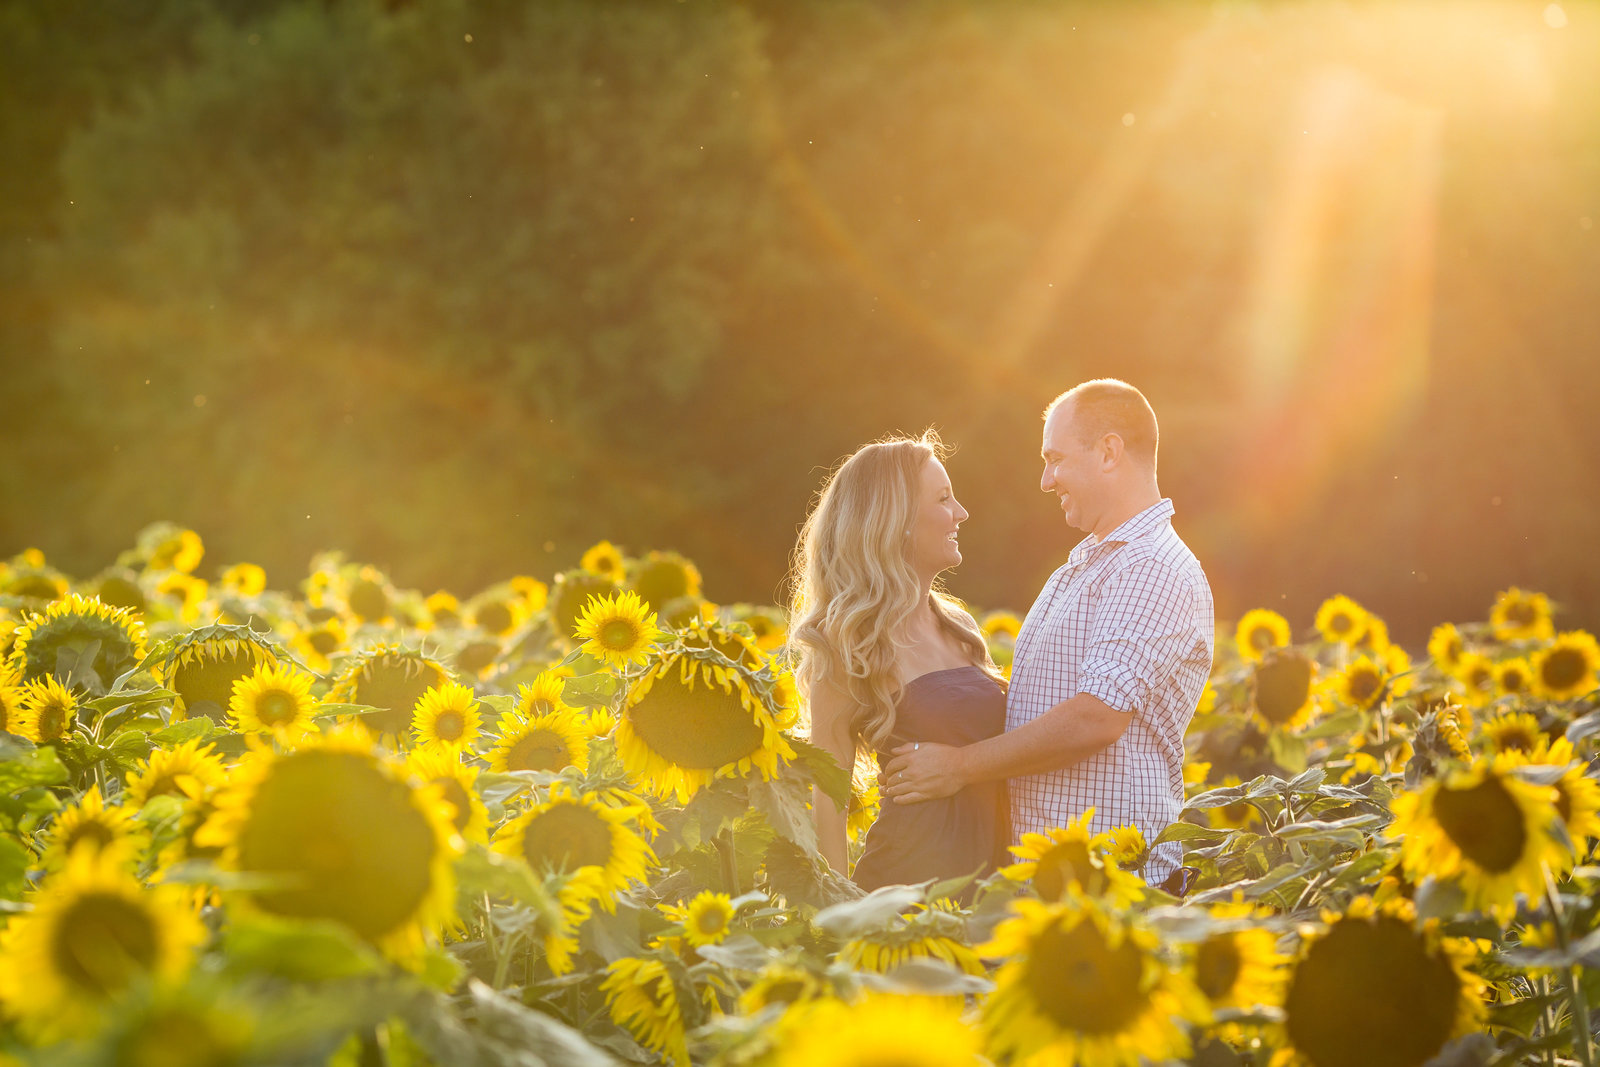 Engagement shoot in a sunflower field rochester rich paprocki photography